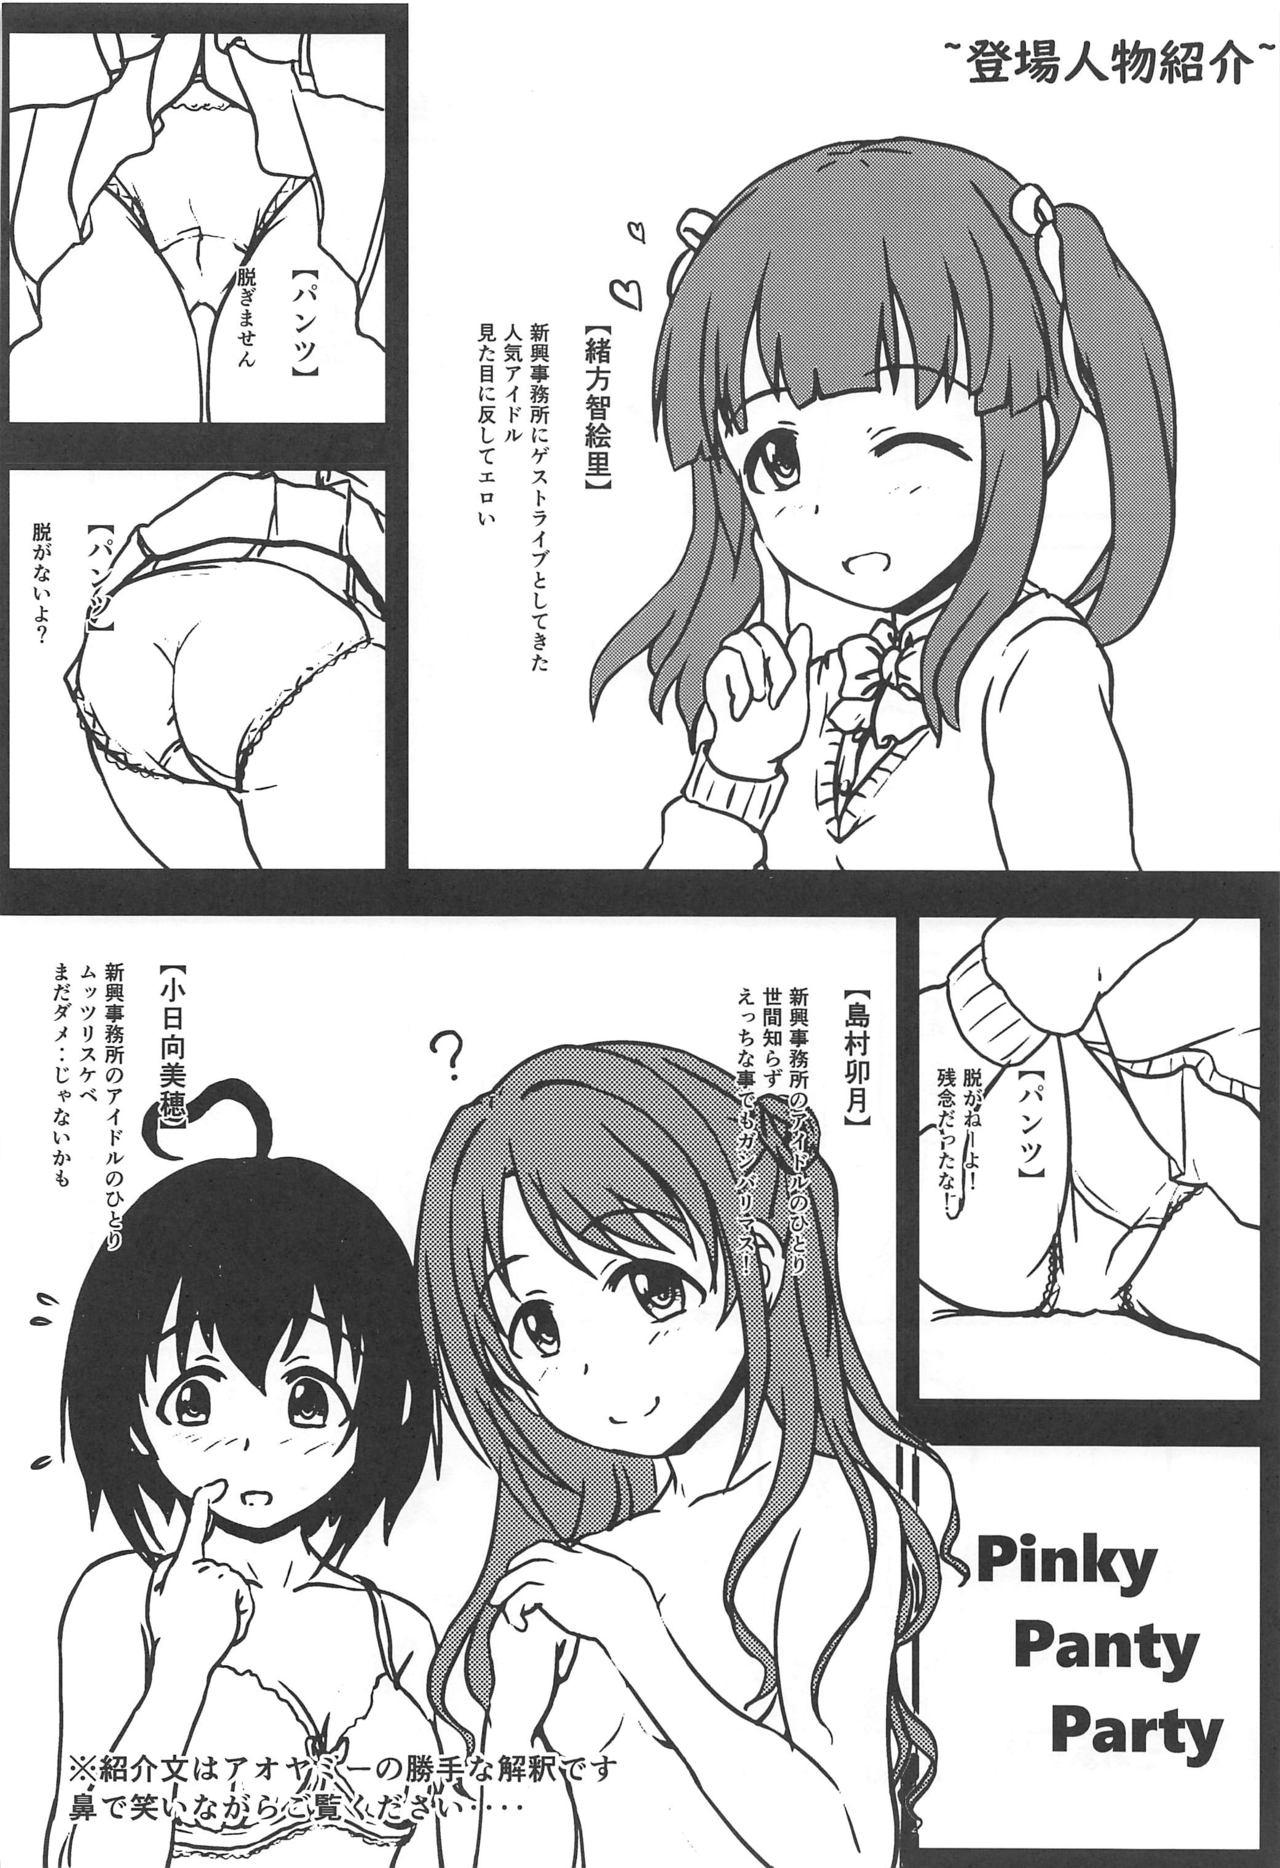 Stunning Pinky Panty Party - The idolmaster Mom - Page 3